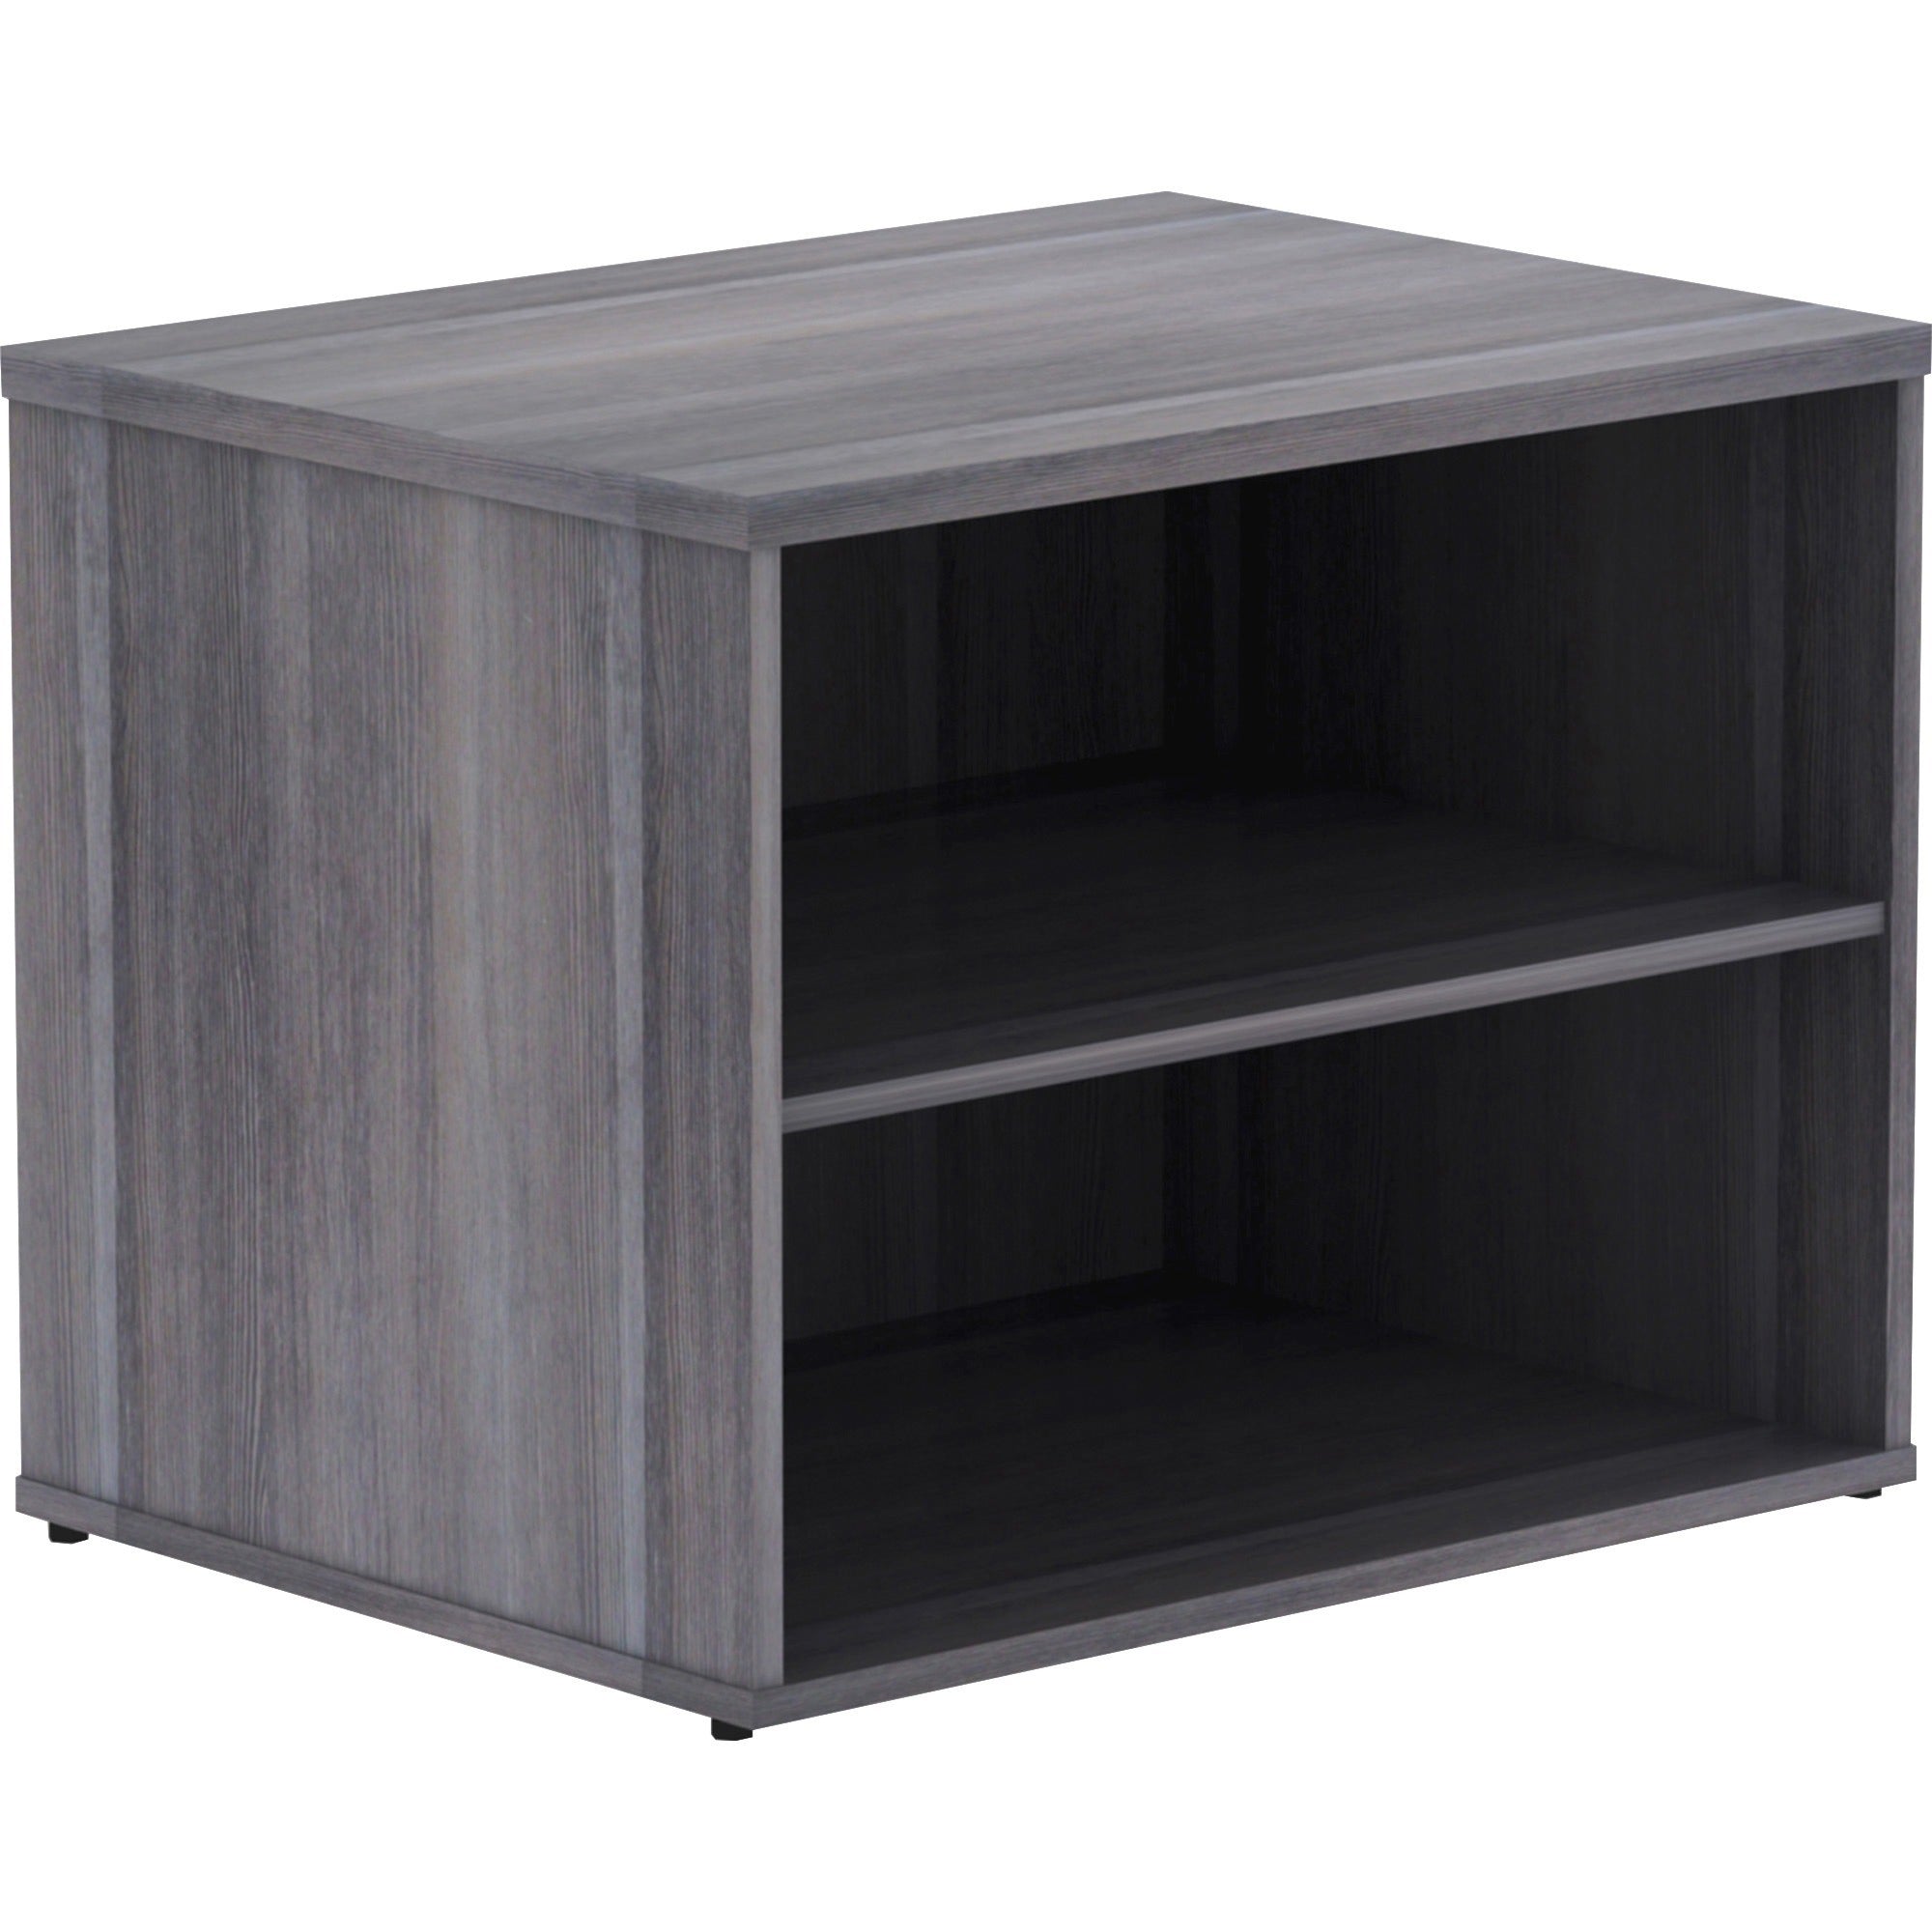 lorell-relevance-series-storage-cabinet-credenza-w-no-doors-295-x-22231-2-shelves-finish-weathered-charcoal-laminate_llr16215 - 1